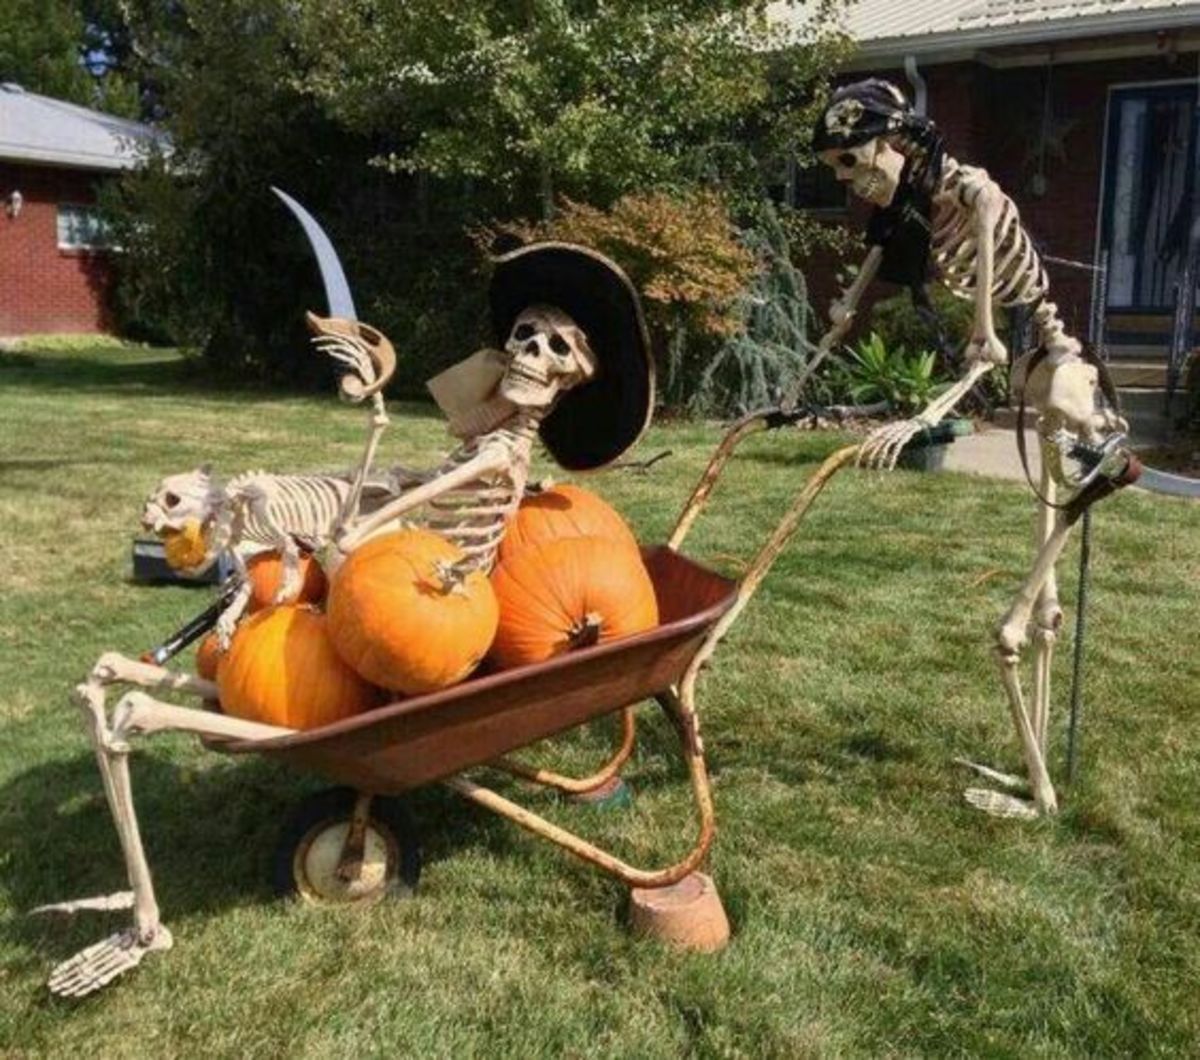 Yo ho, yo ho, it's a pirate's life for these skeletons! They're plundering some pumpkins.